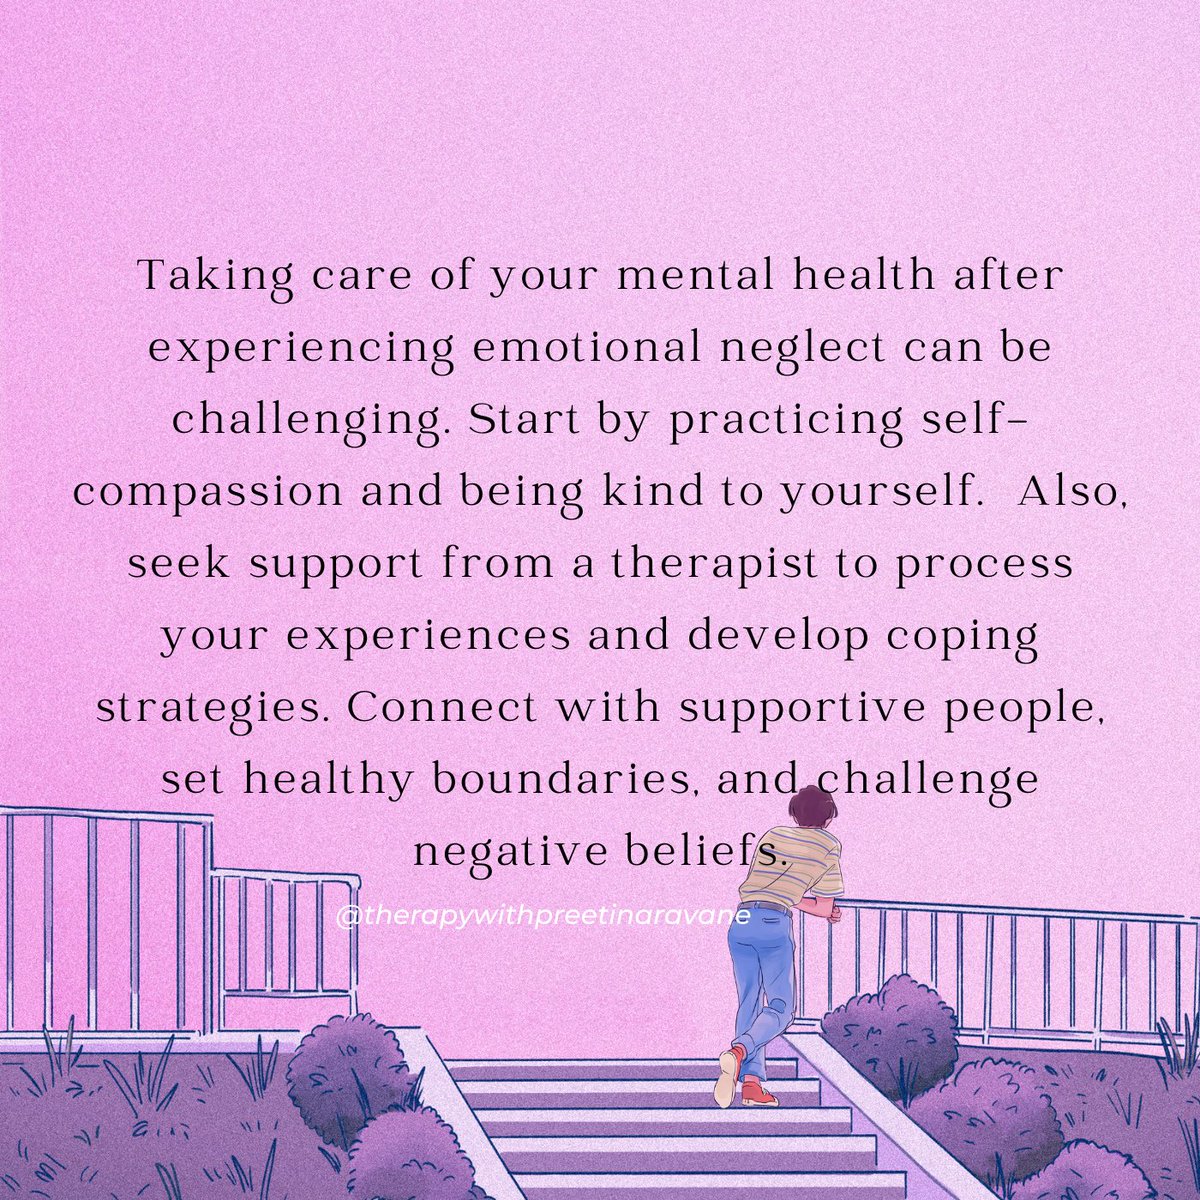 #mentalhealth #mentalhealthawareness #counselling #counsellingpsychology #therapy #therapist #emotionalneglect #emotionalsupport #validation #affection #lowselfesteem #anxiety #depression #unhealthyrelationships #healthycoping #selfcare #selfcompassion #therapywithpreetinaravane